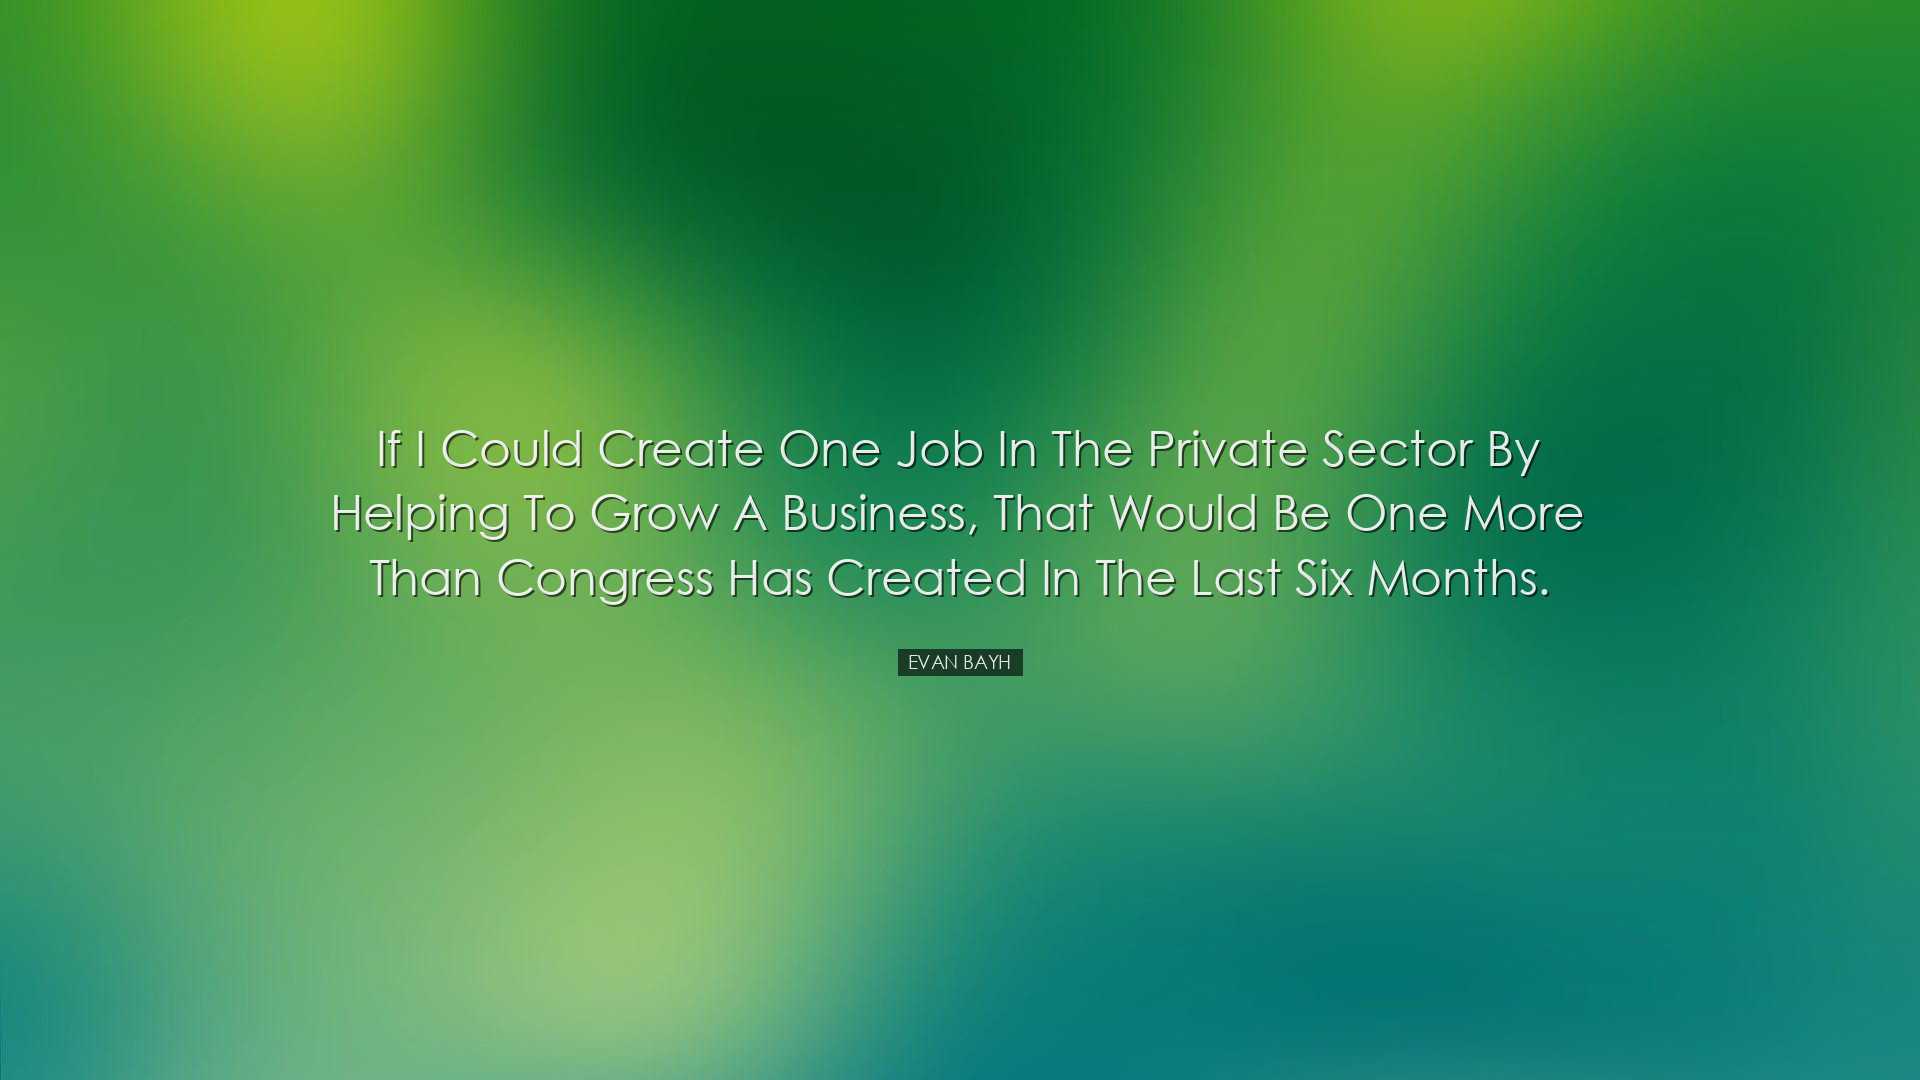 If I could create one job in the private sector by helping to grow